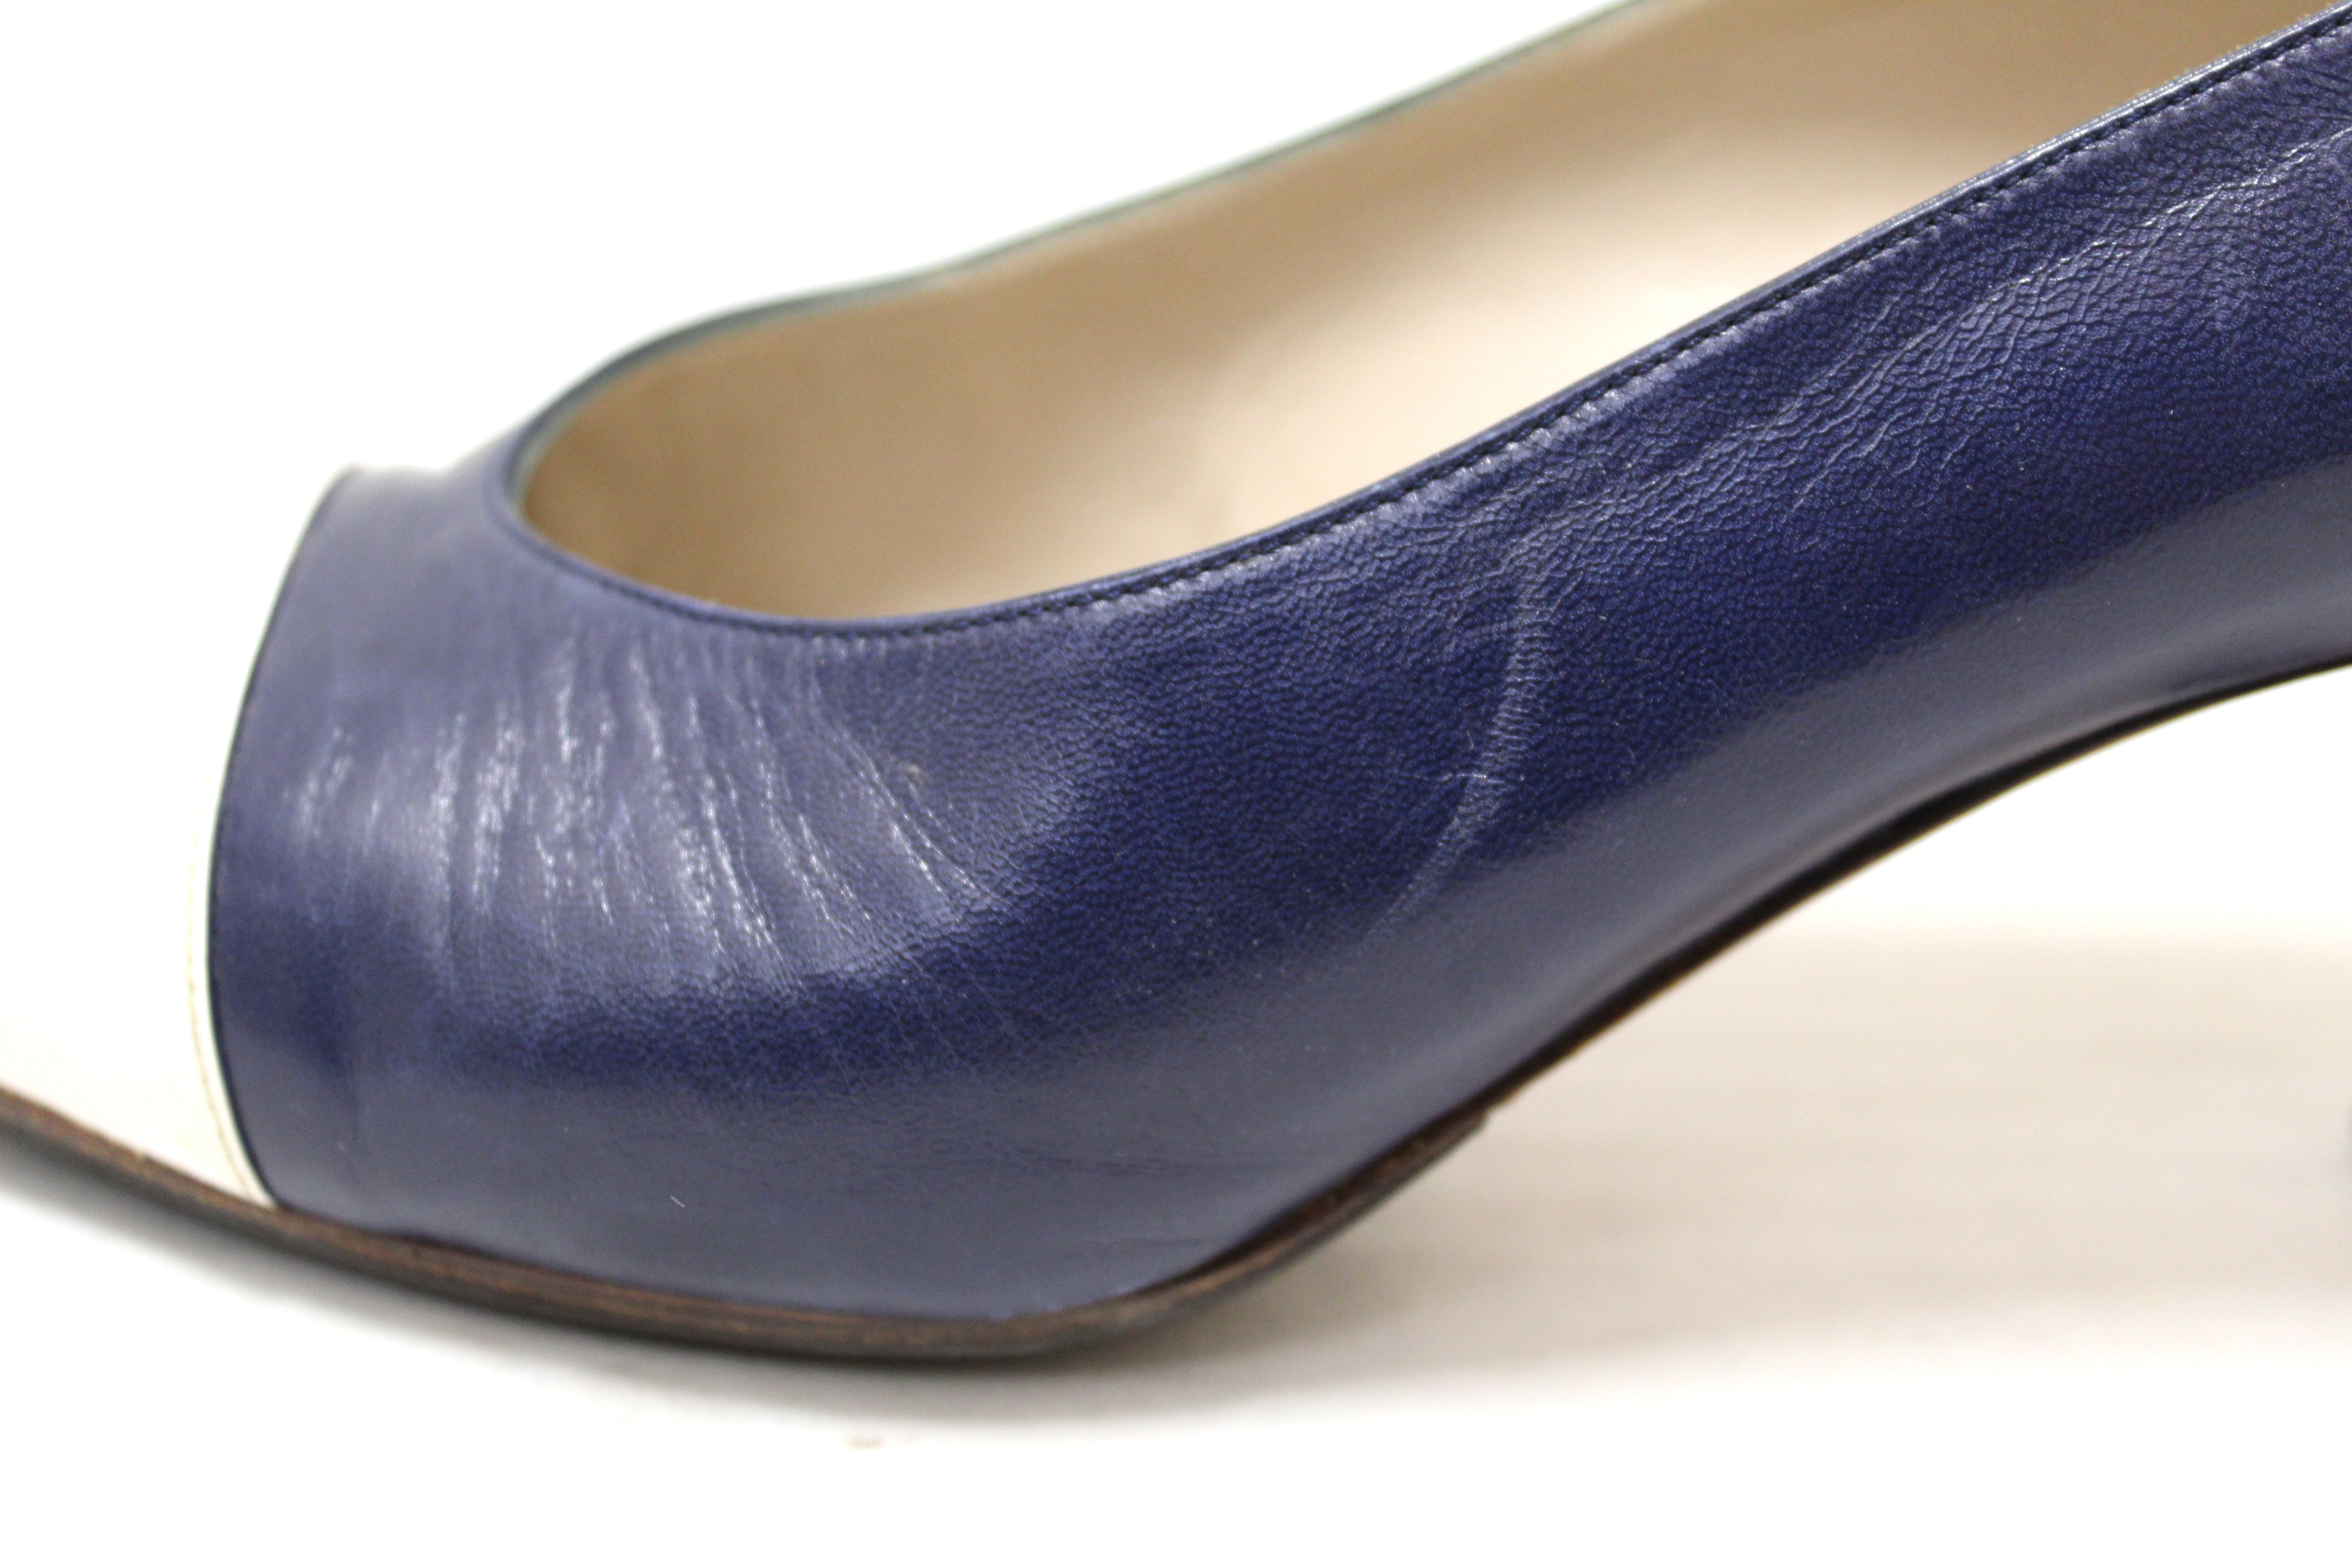 Authentic Chanel Navy and White Leather Pointed Heel size 35.5